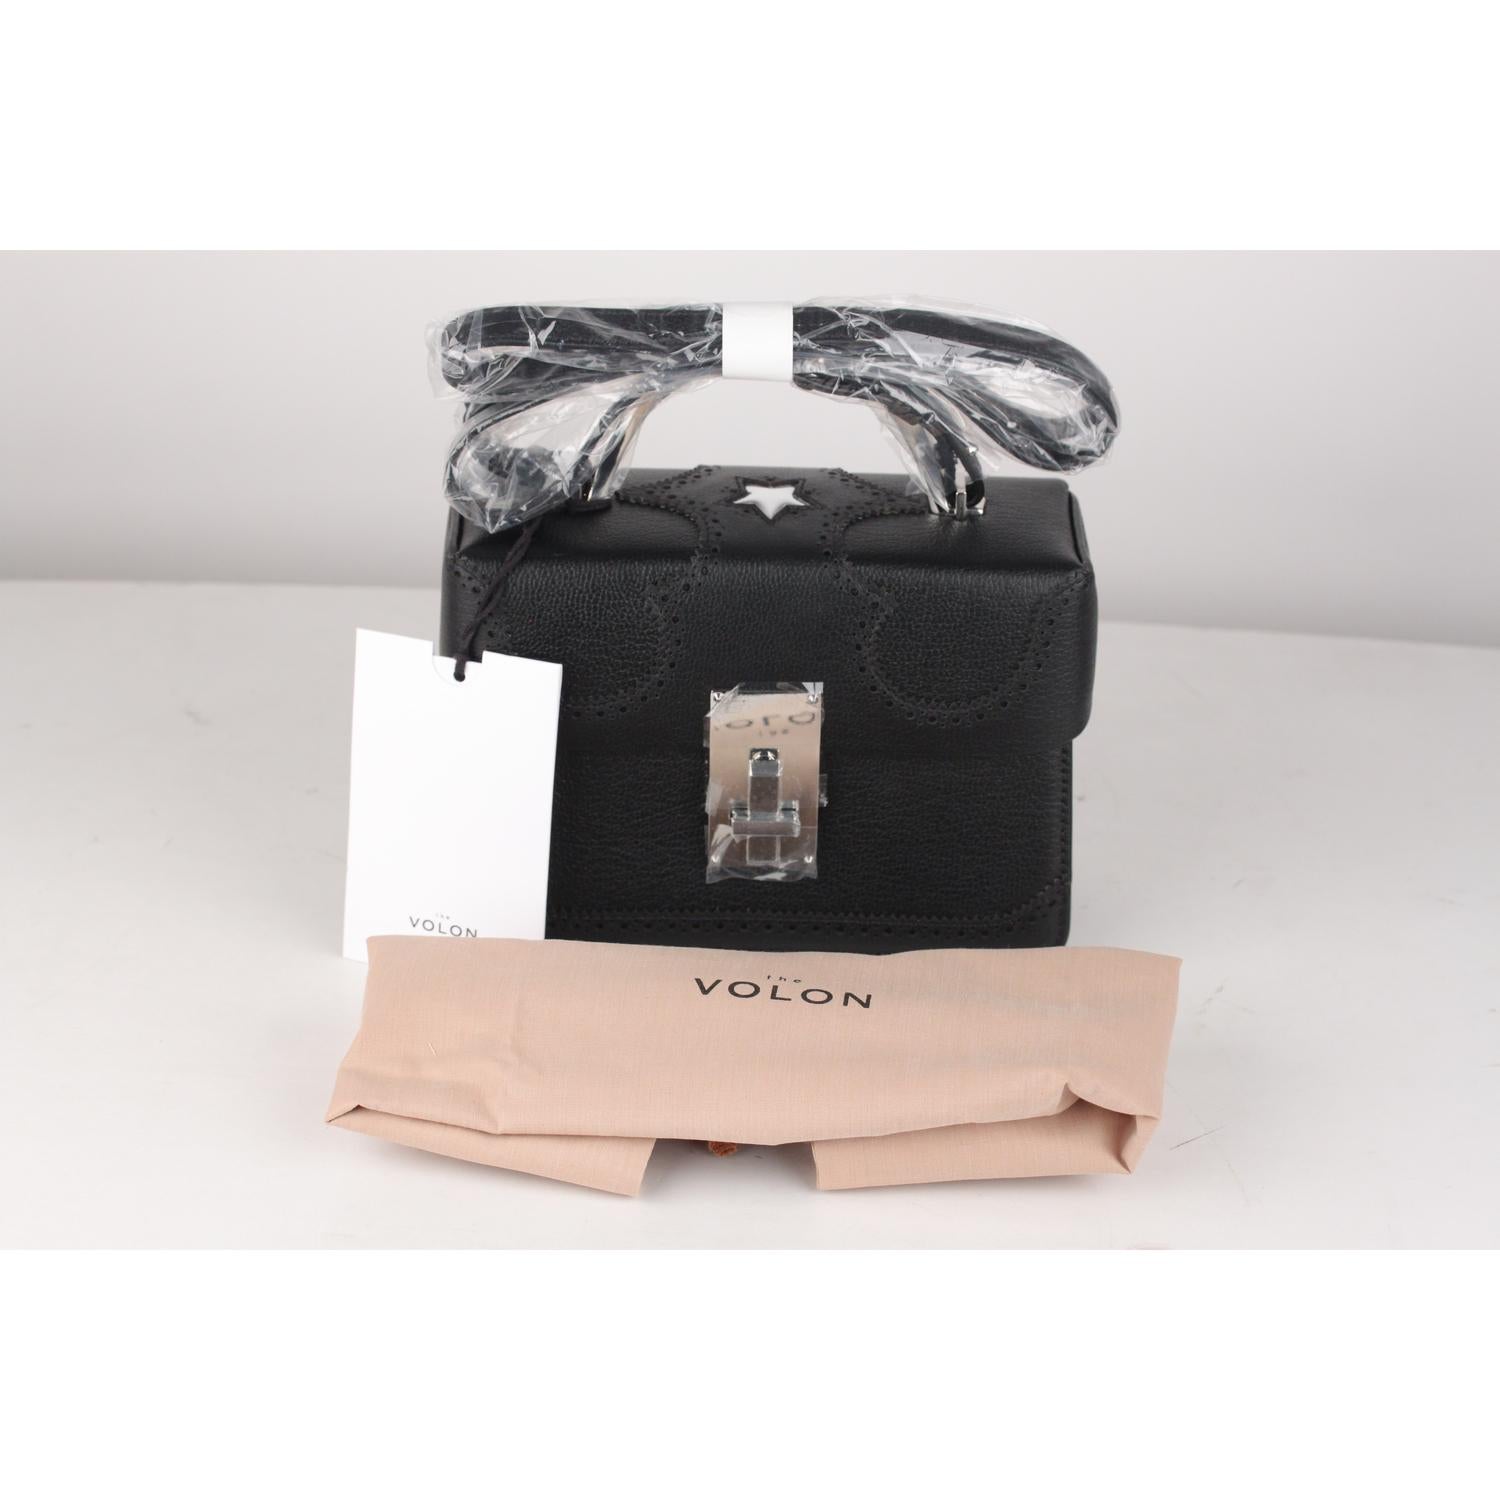 Beautiful black leather THE VOLON 'Data Alice' small crossbody bag. It features a structured design, accordion details on the side and brogue accents. This lovely bag has a round top handle and an adjustable and removable shoulder strap, silver